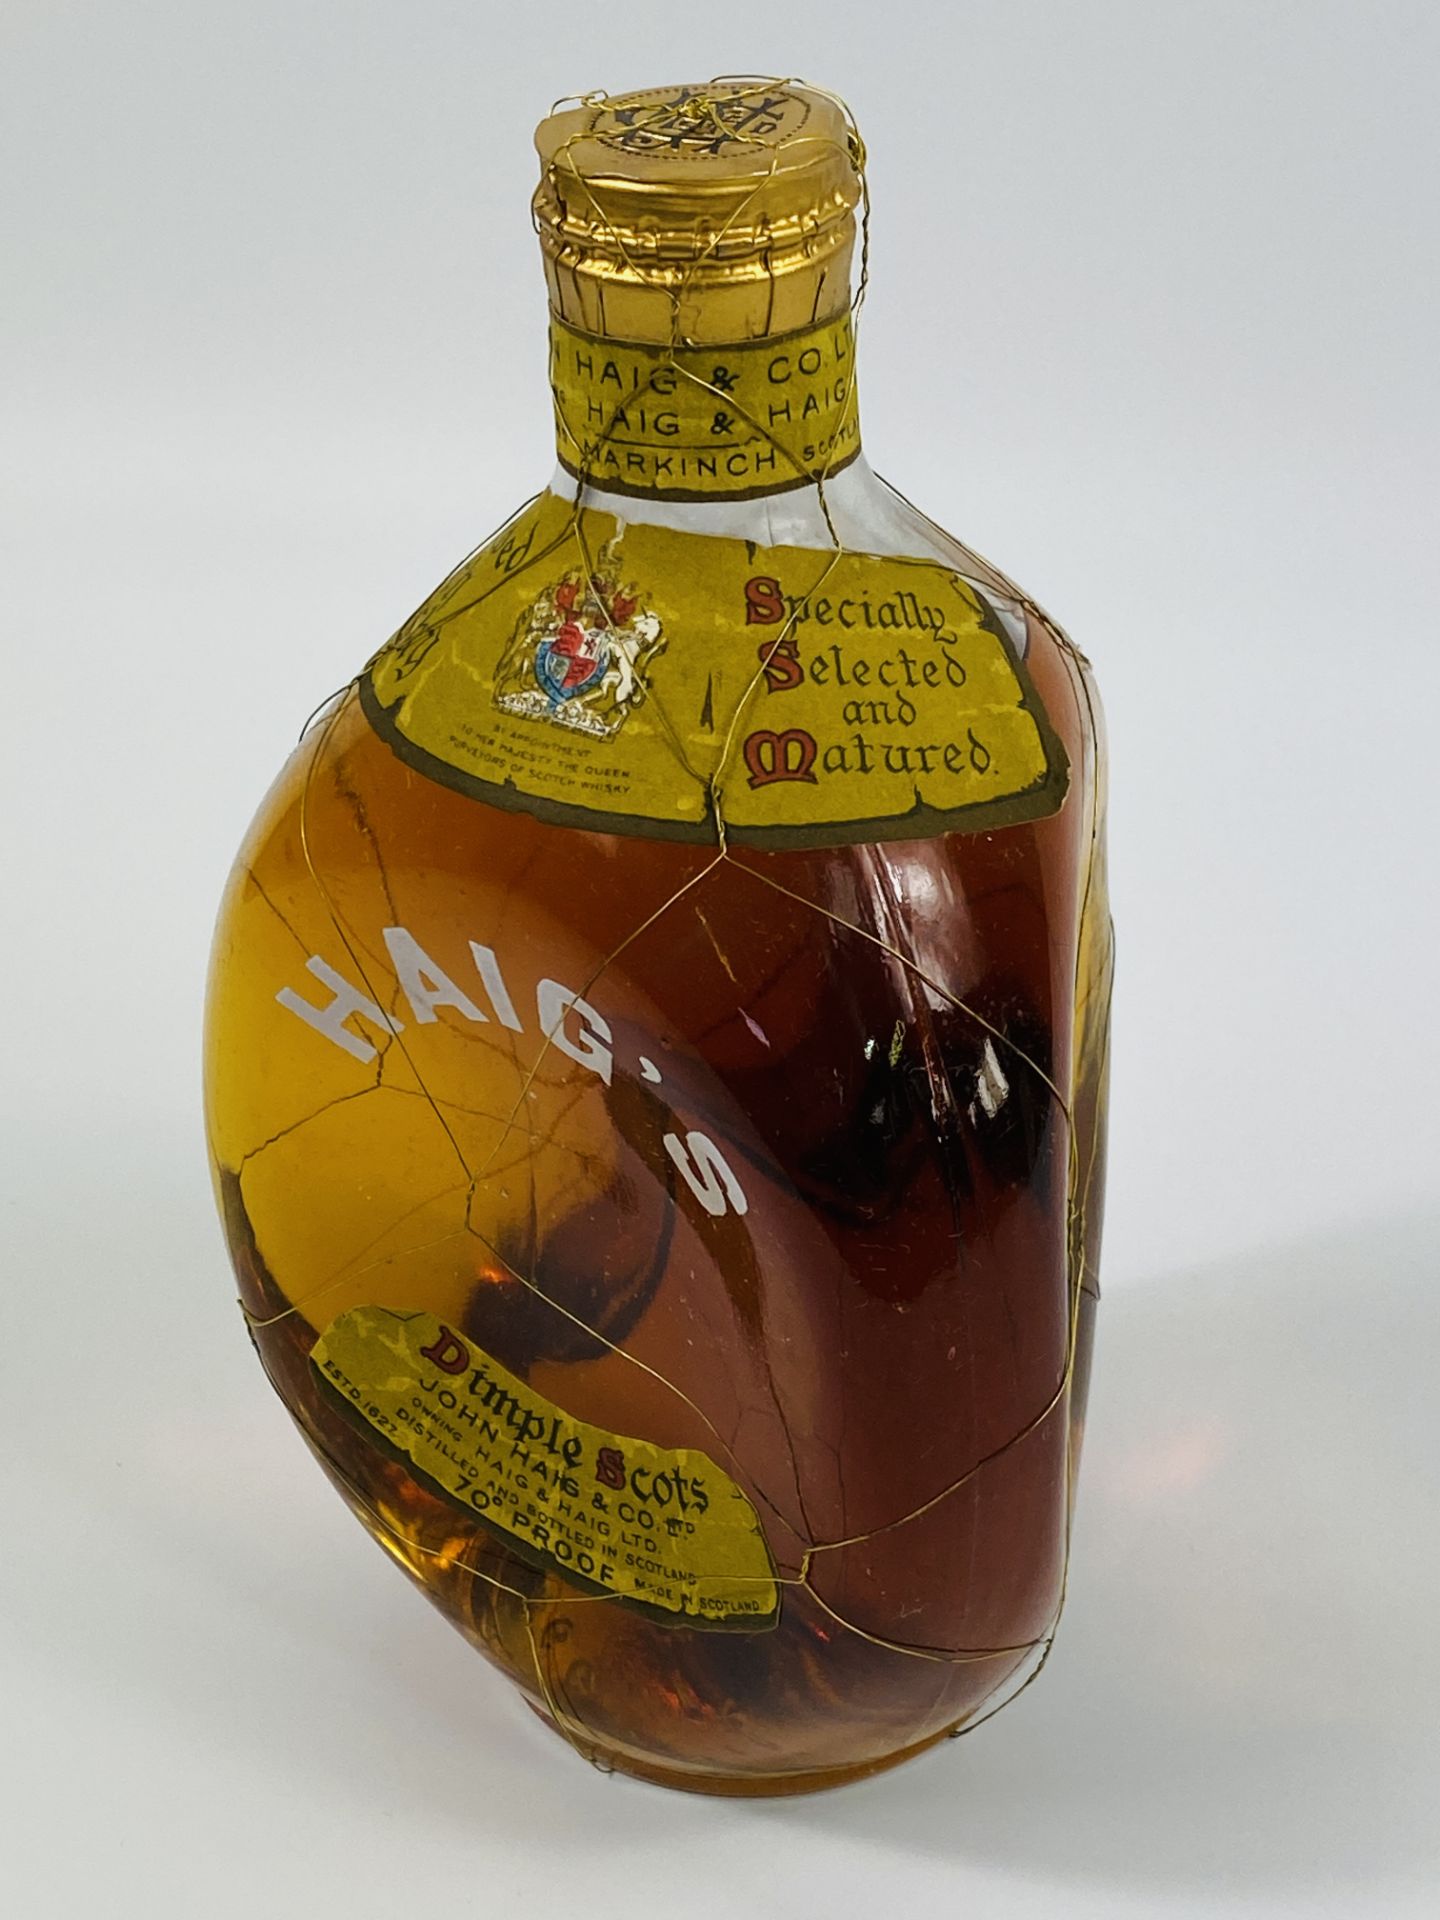 Two bottles of Dimple Scotch whisky - Image 4 of 5